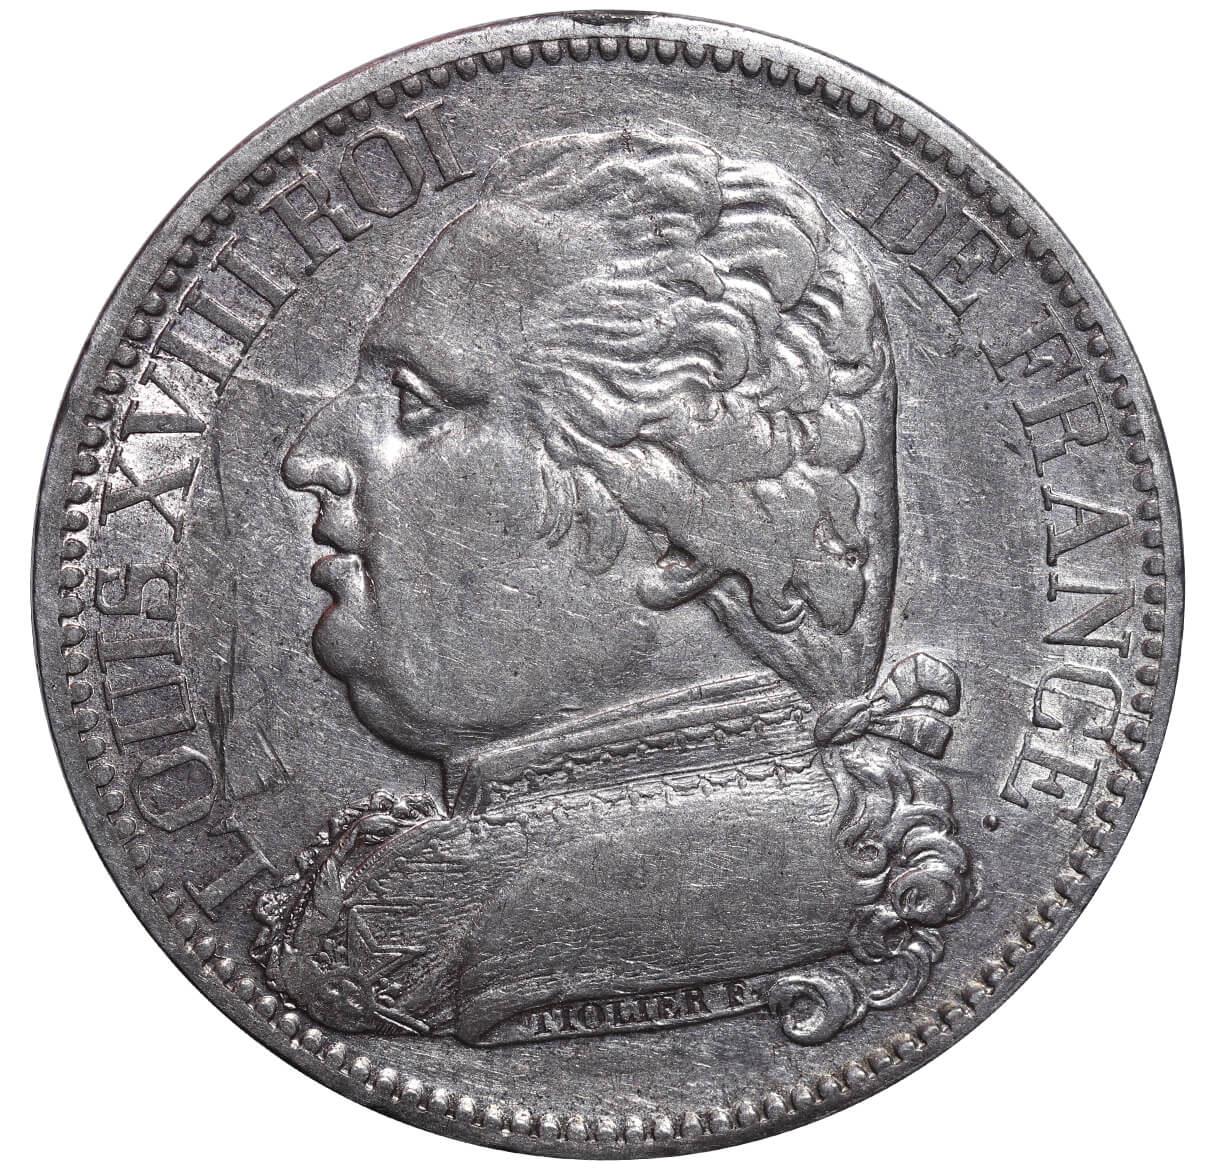 France, 5 Francs, 1814 year, W - Image 2 of 3